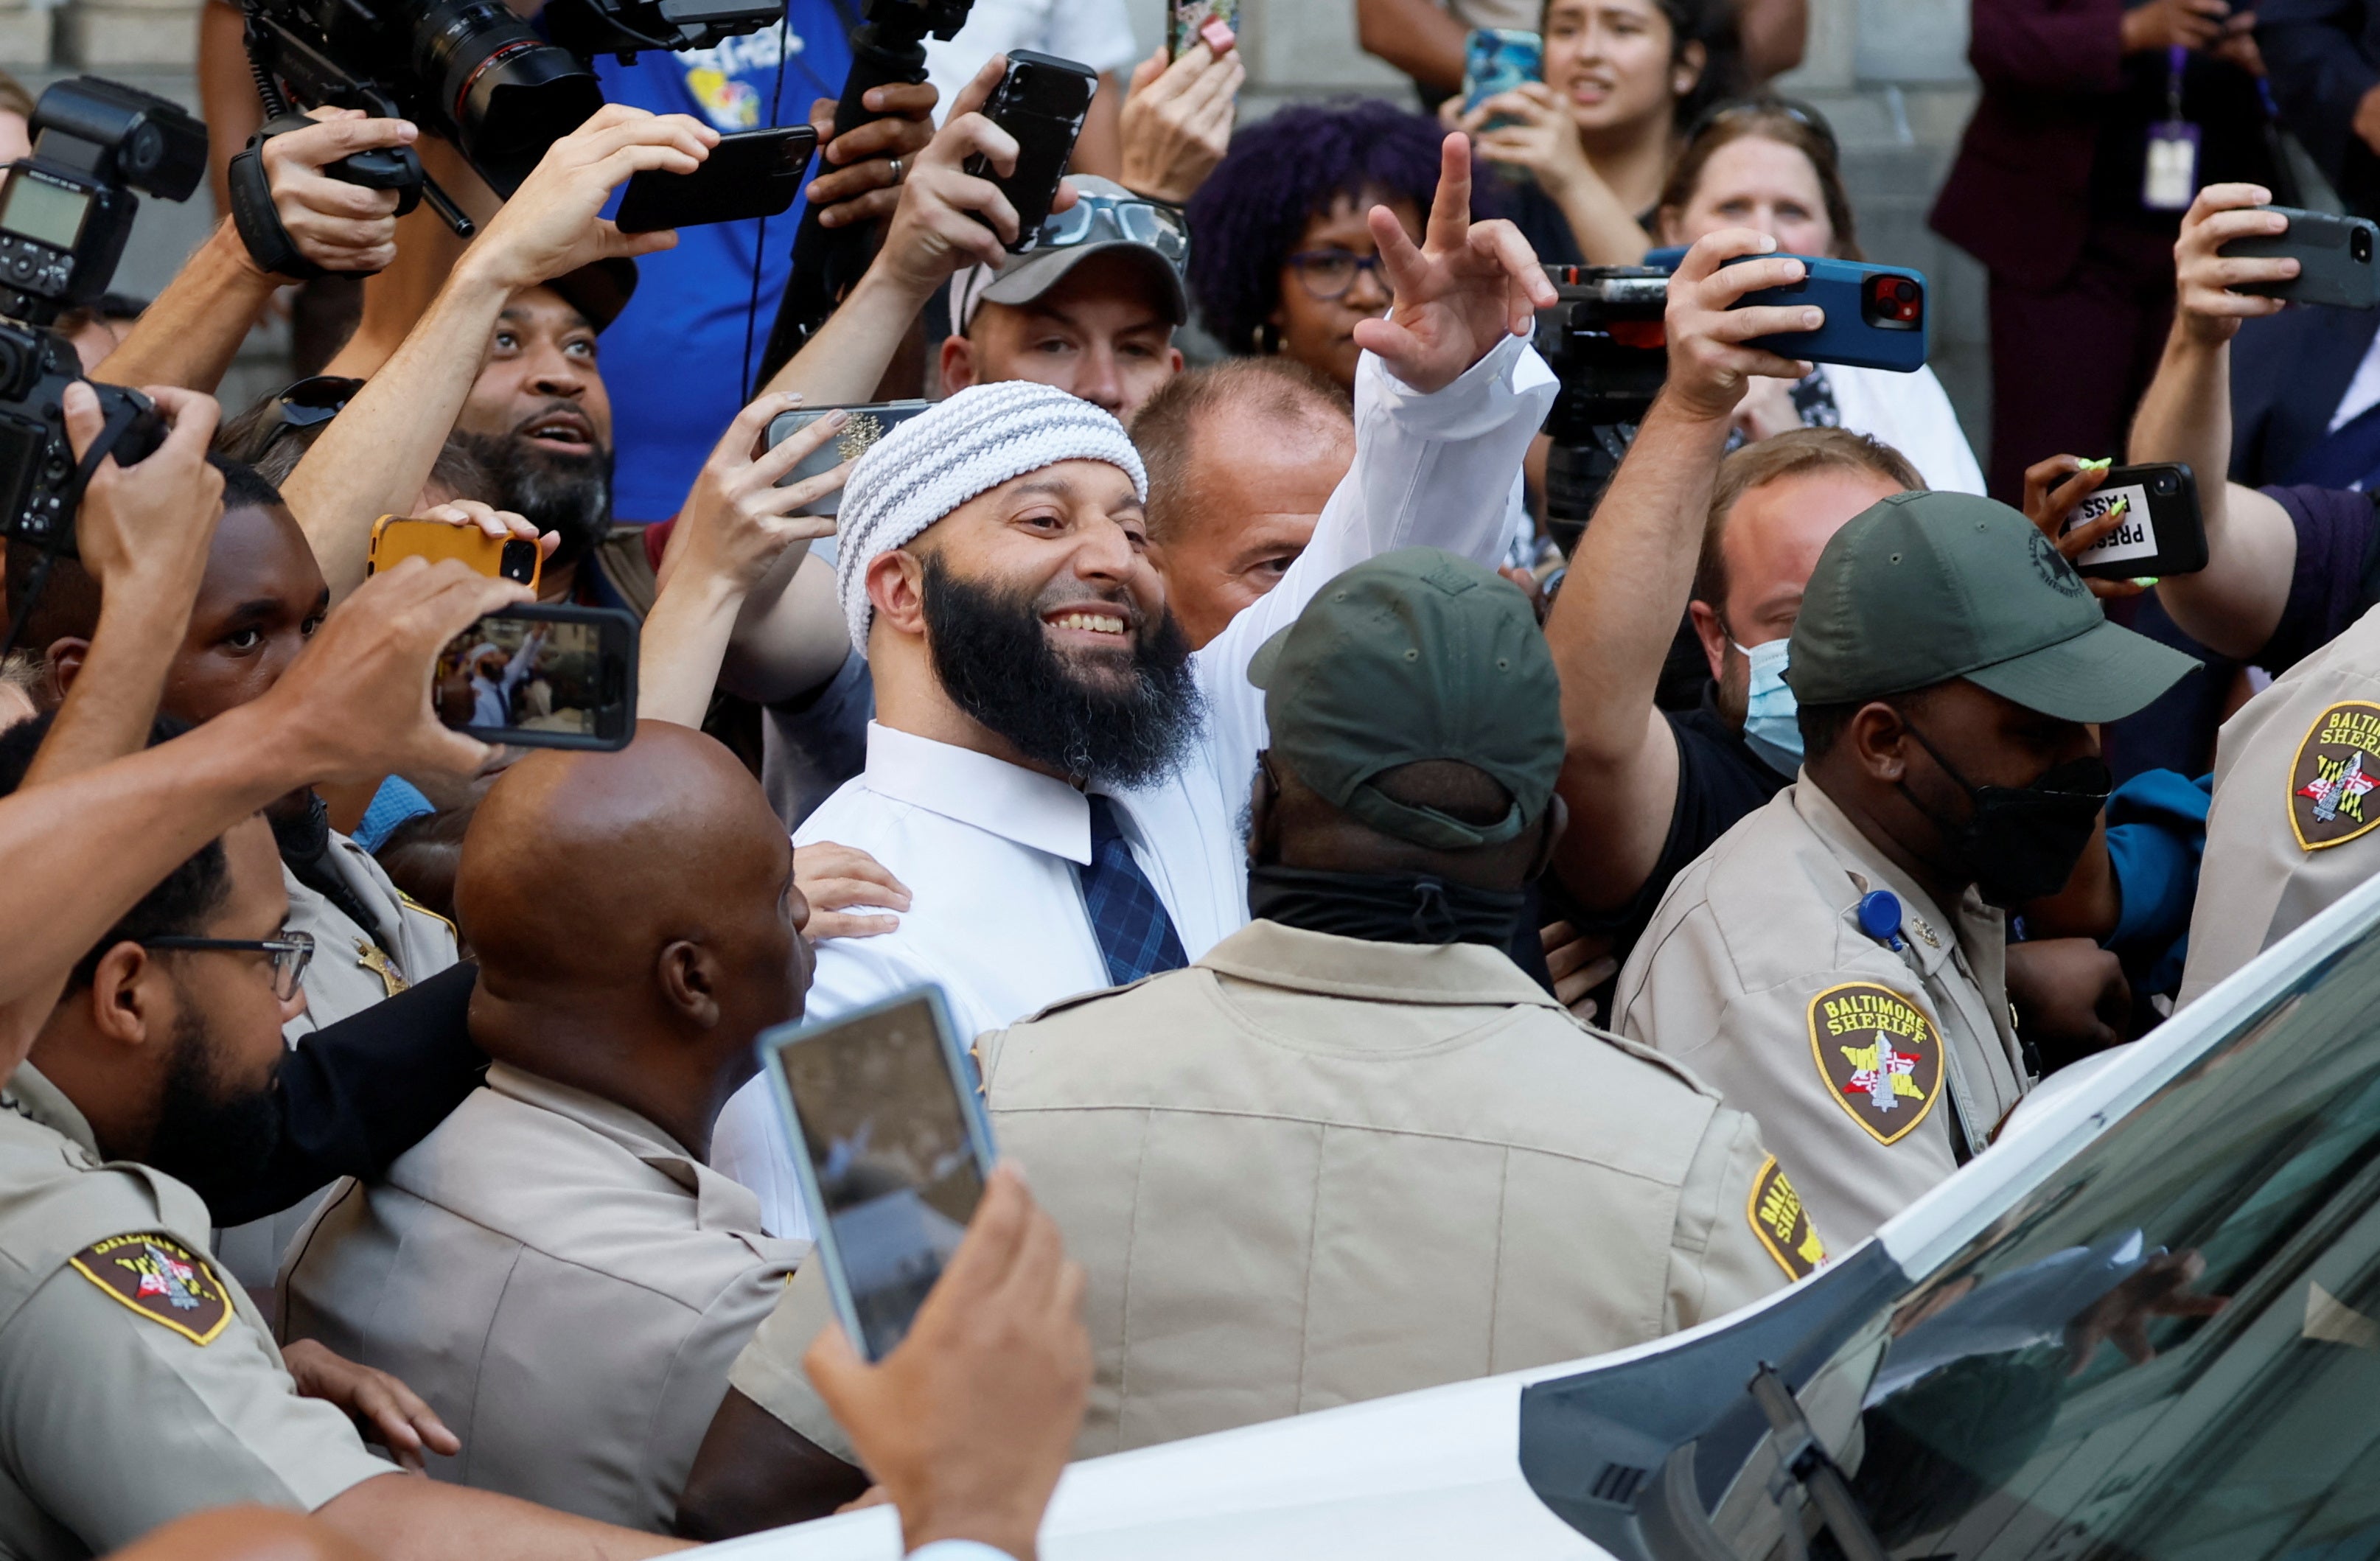 Adnan Syed walks out of Baltimore court a free man after his conviction was overturned